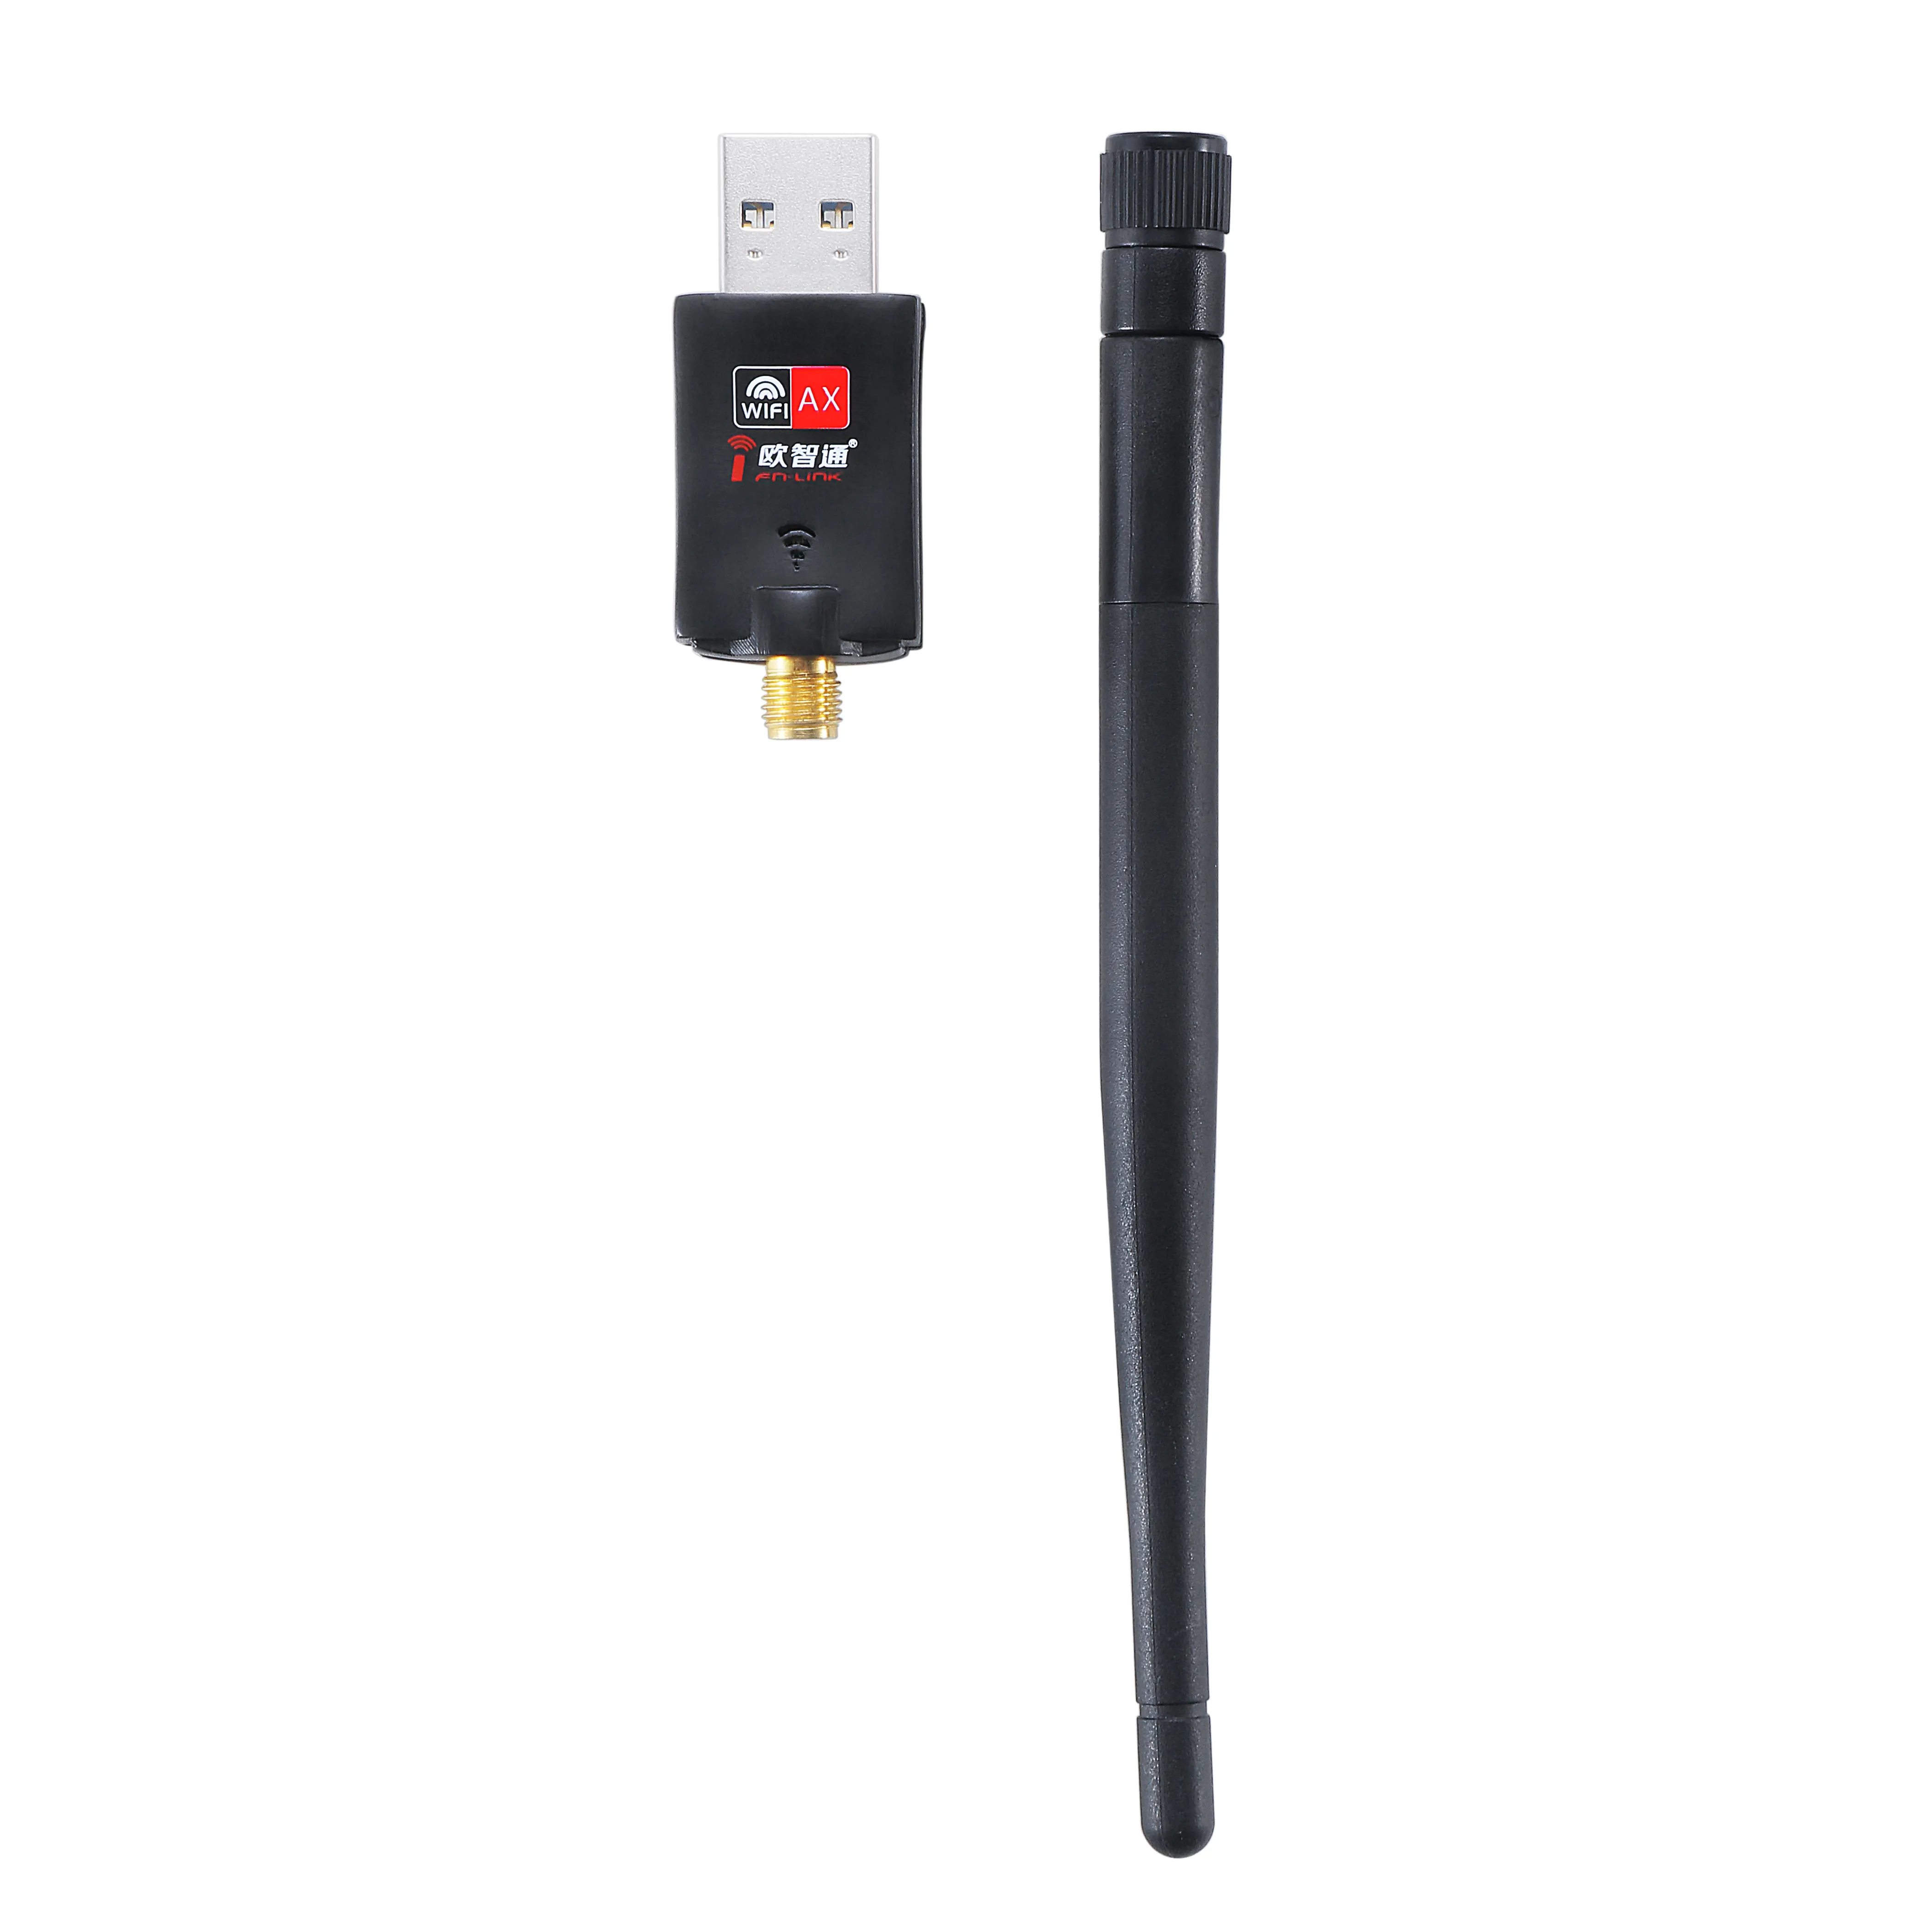 Fn-link D232B-WB Factory Hot Sales Hot Style Usb 2.0 Wireless Network Wi-Fi Cards External Antenna Wifi Dongle